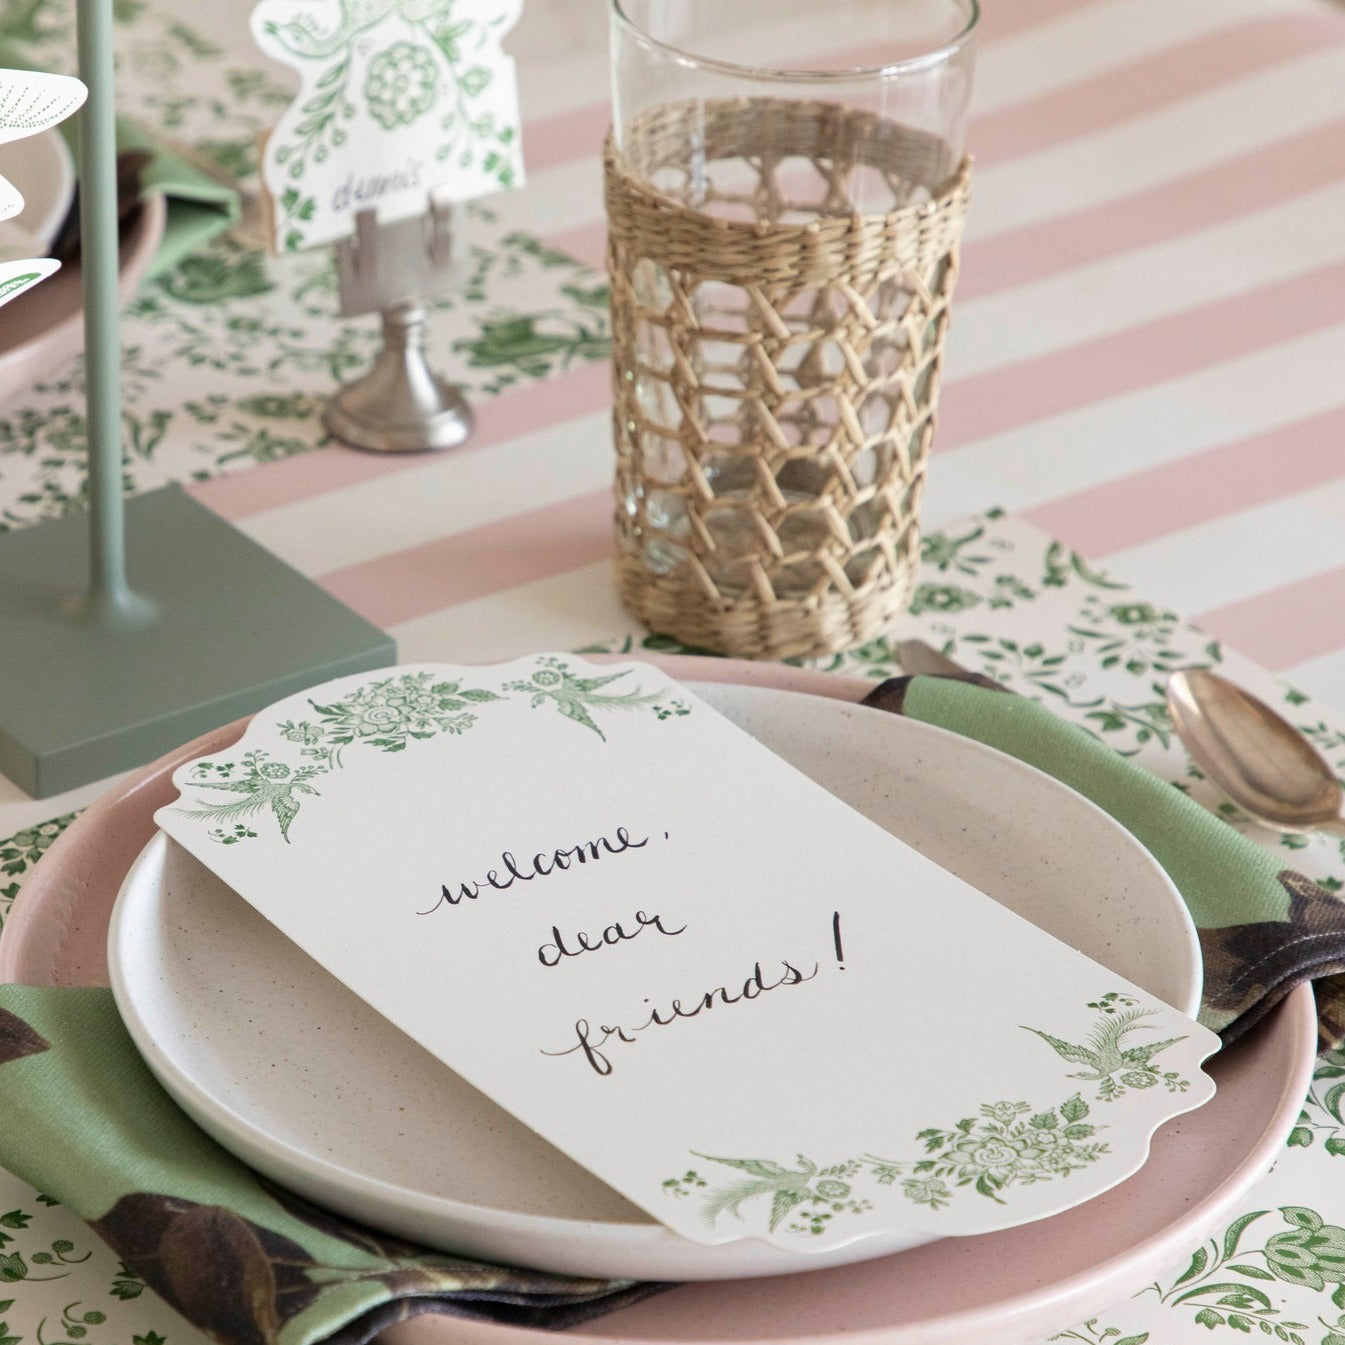 An Hester &amp; Cook Green Asiatic Pheasants Table Card with a larger writing area and a floral design.